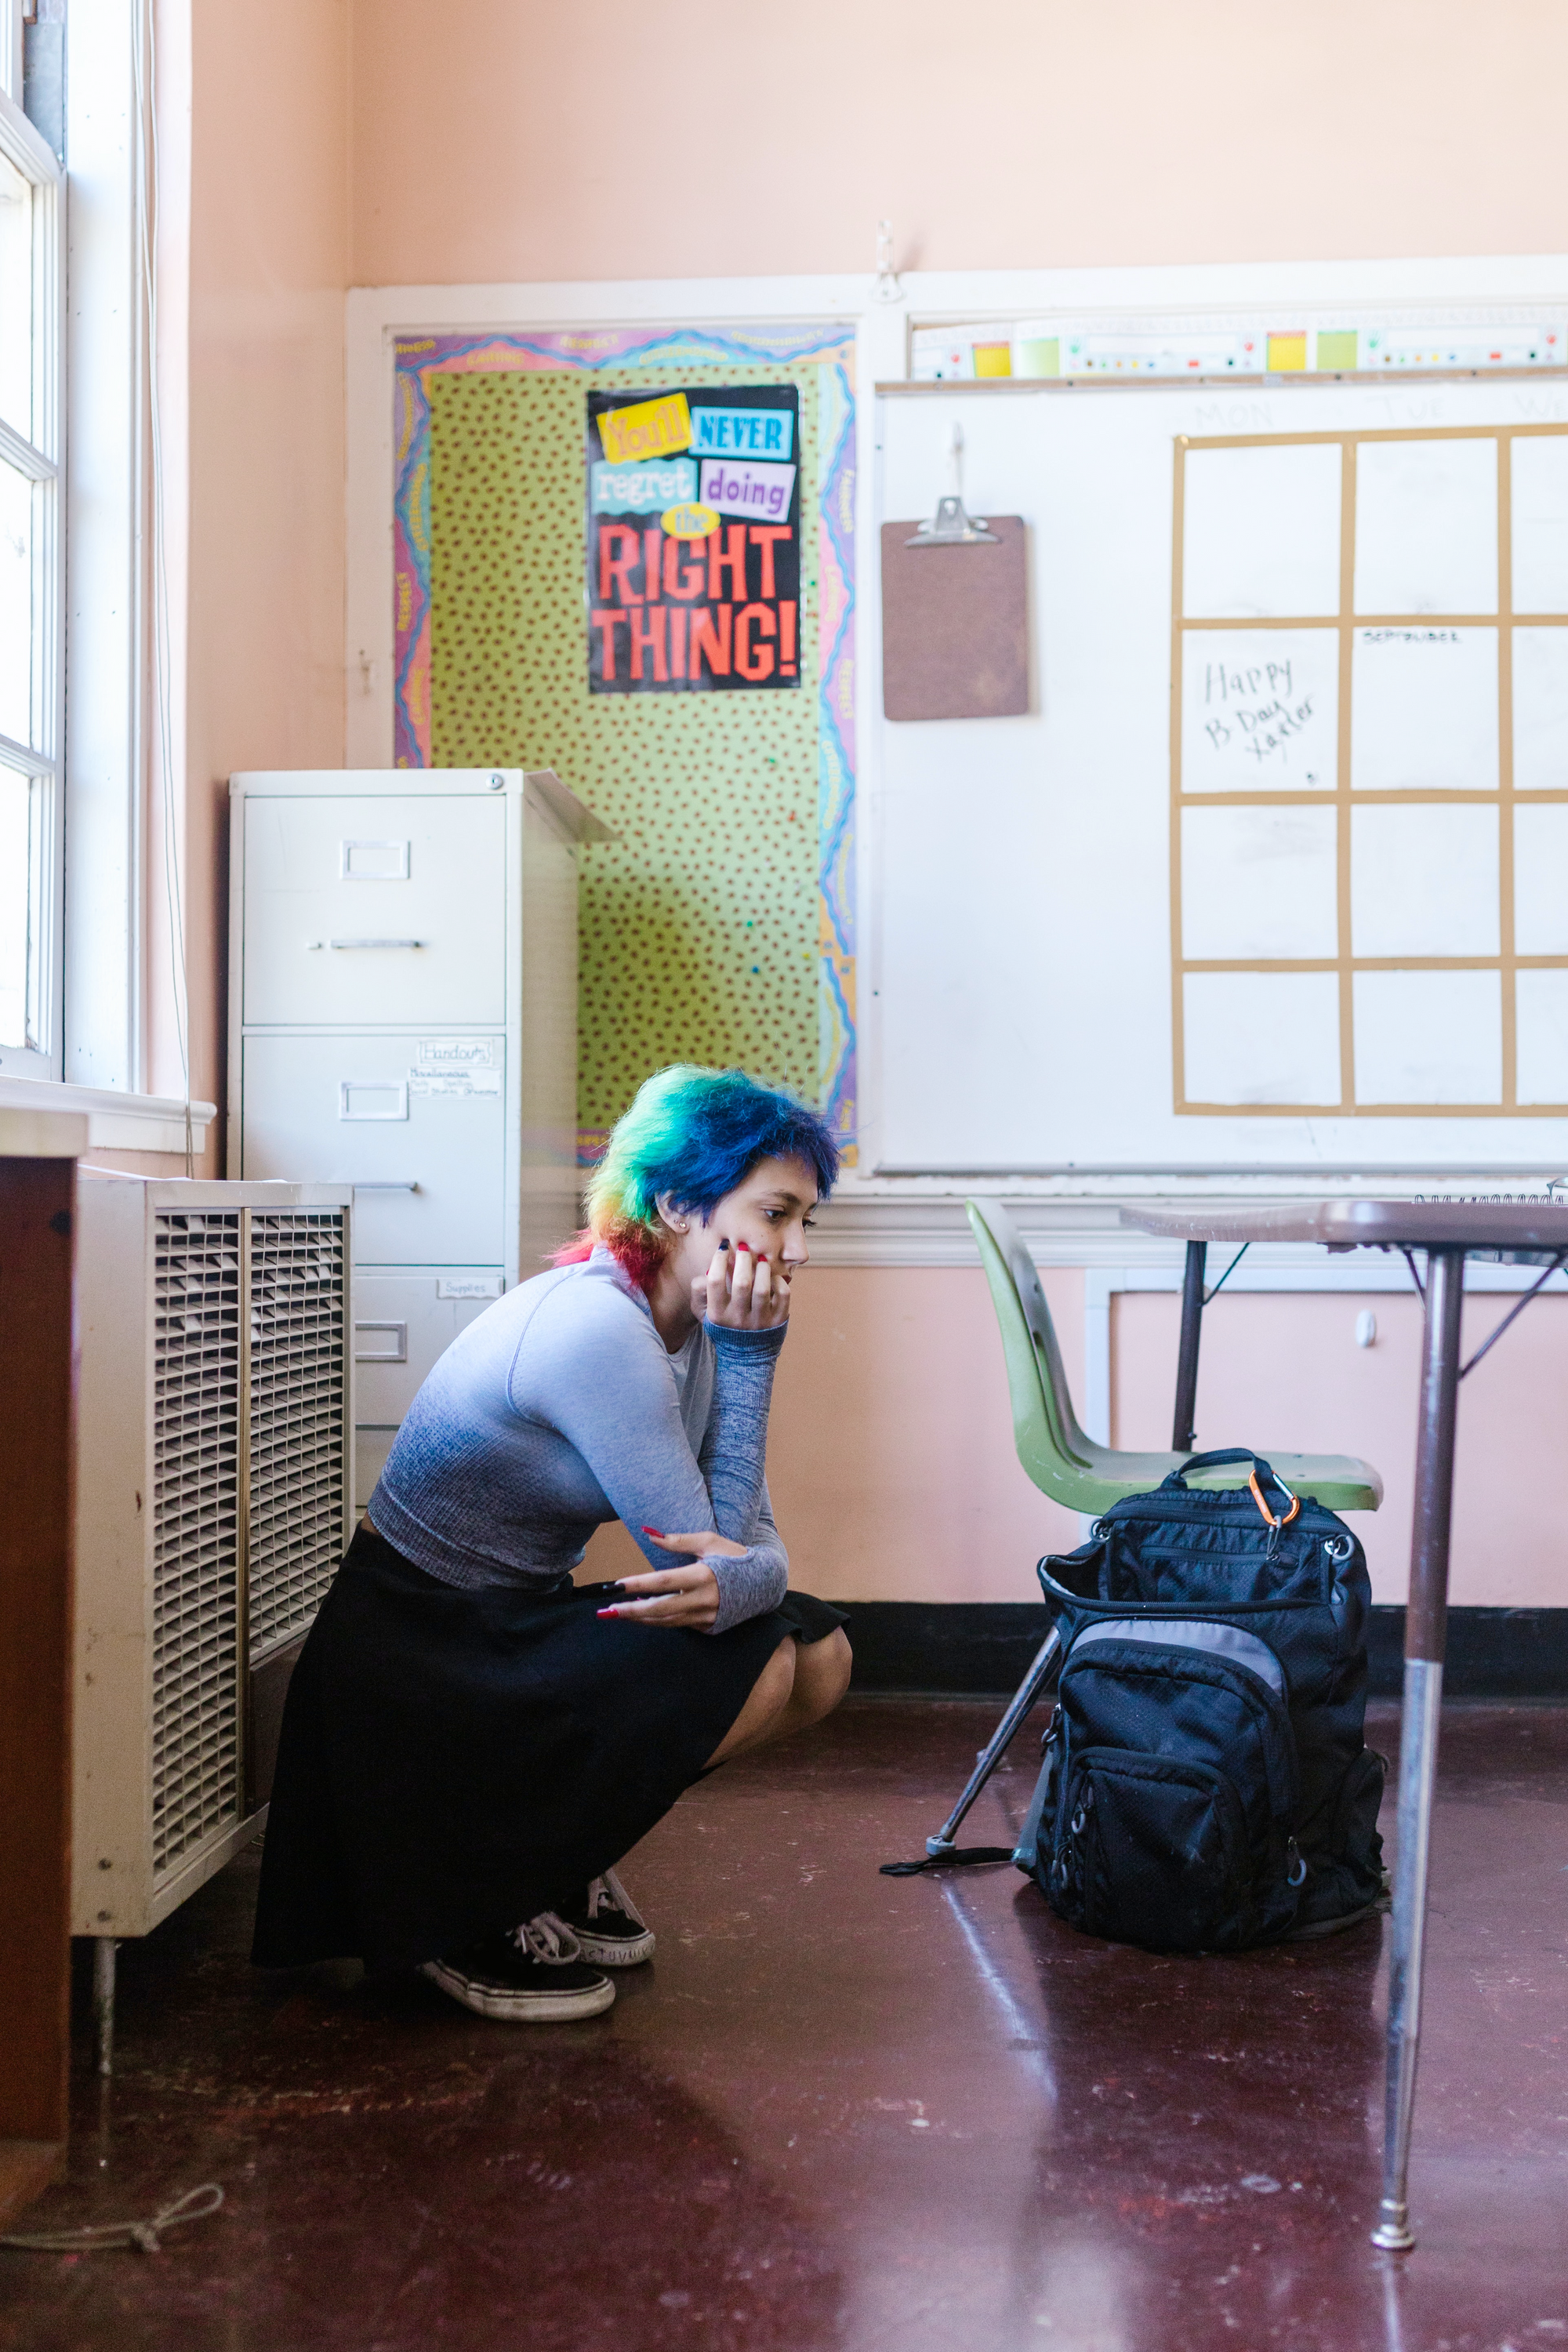 Image of a student with rainbow hair crouched down on the ground in a classroom